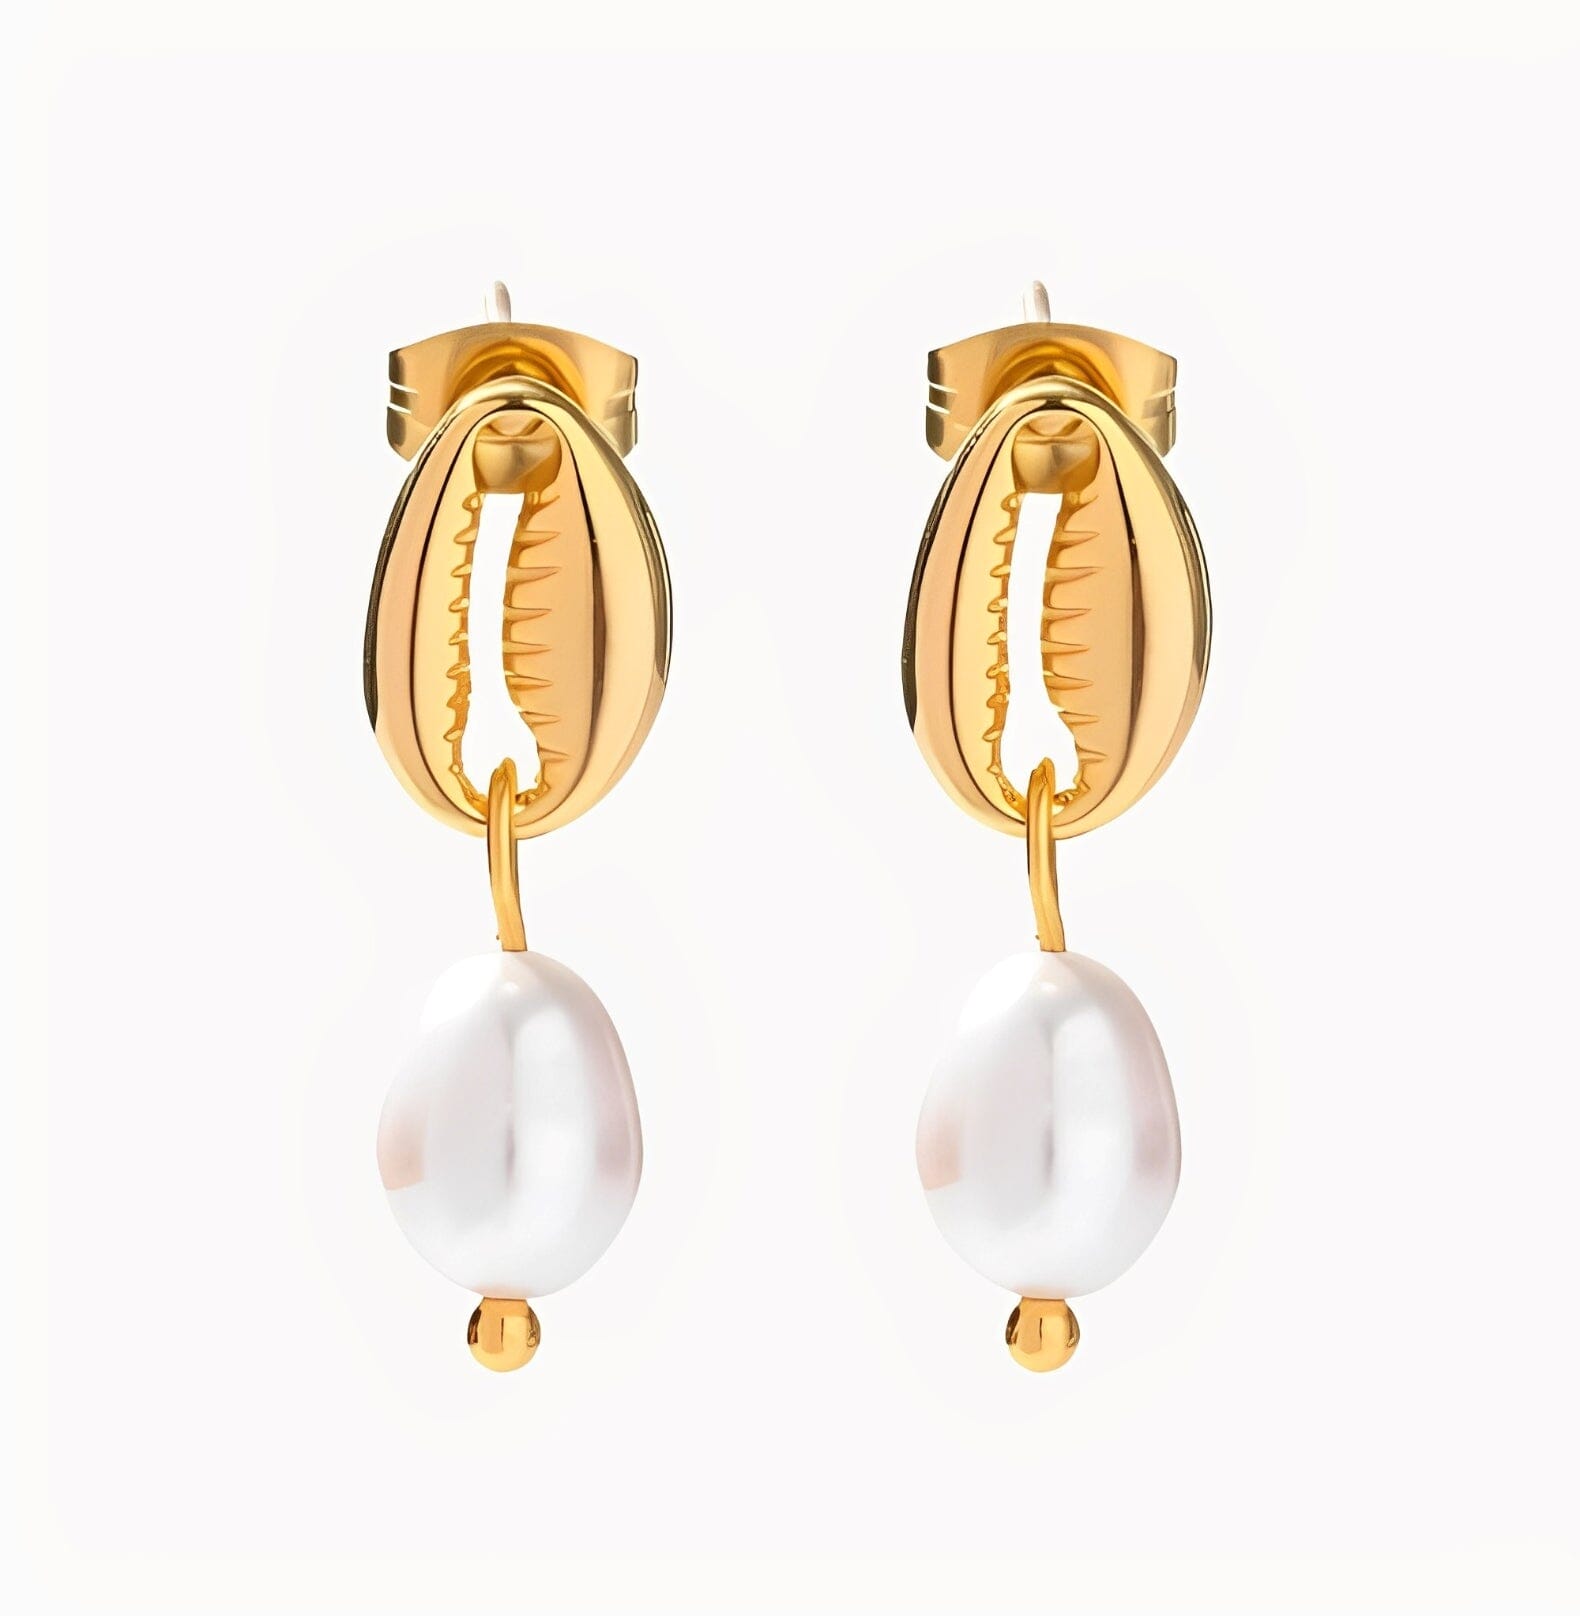 PEARL STUD EARRINGS earing Yubama Jewelry Online Store - The Elegant Designs of Gold and Silver ! 